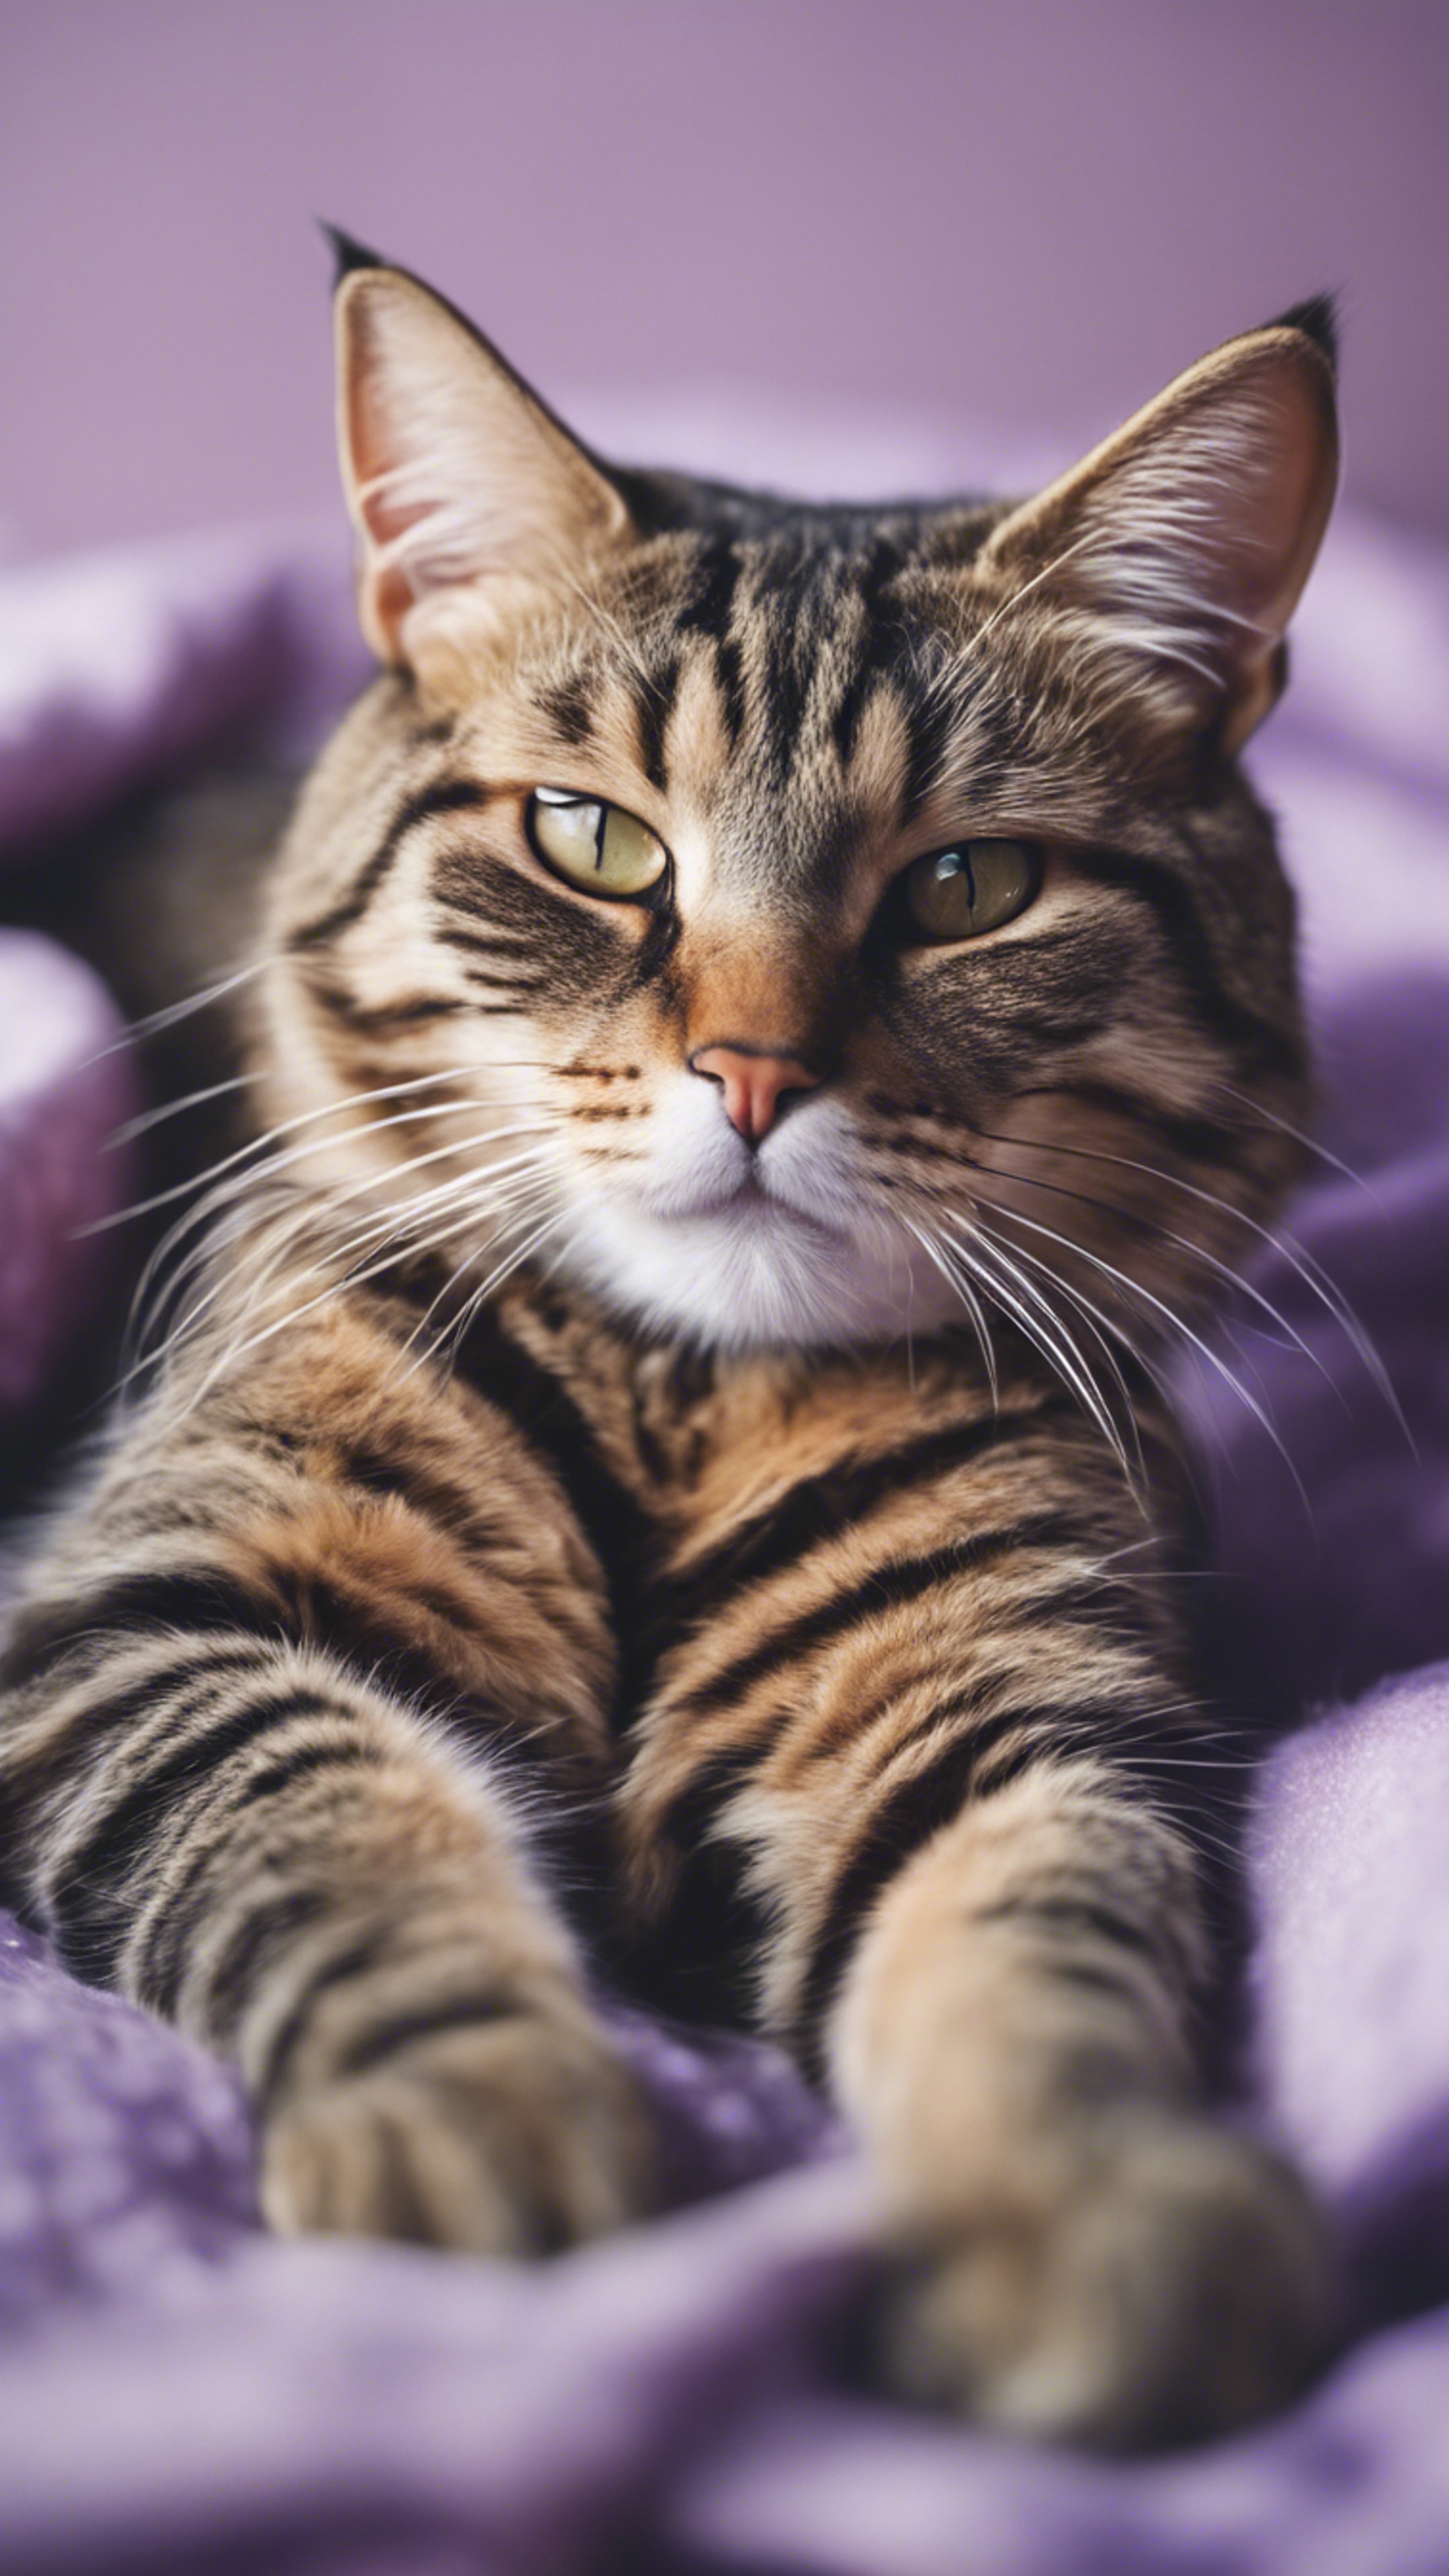 A candid portrait of a tabby cat lounging on a pastel purple blanket. Tapeta[f4cf510d1a1d426195dc]